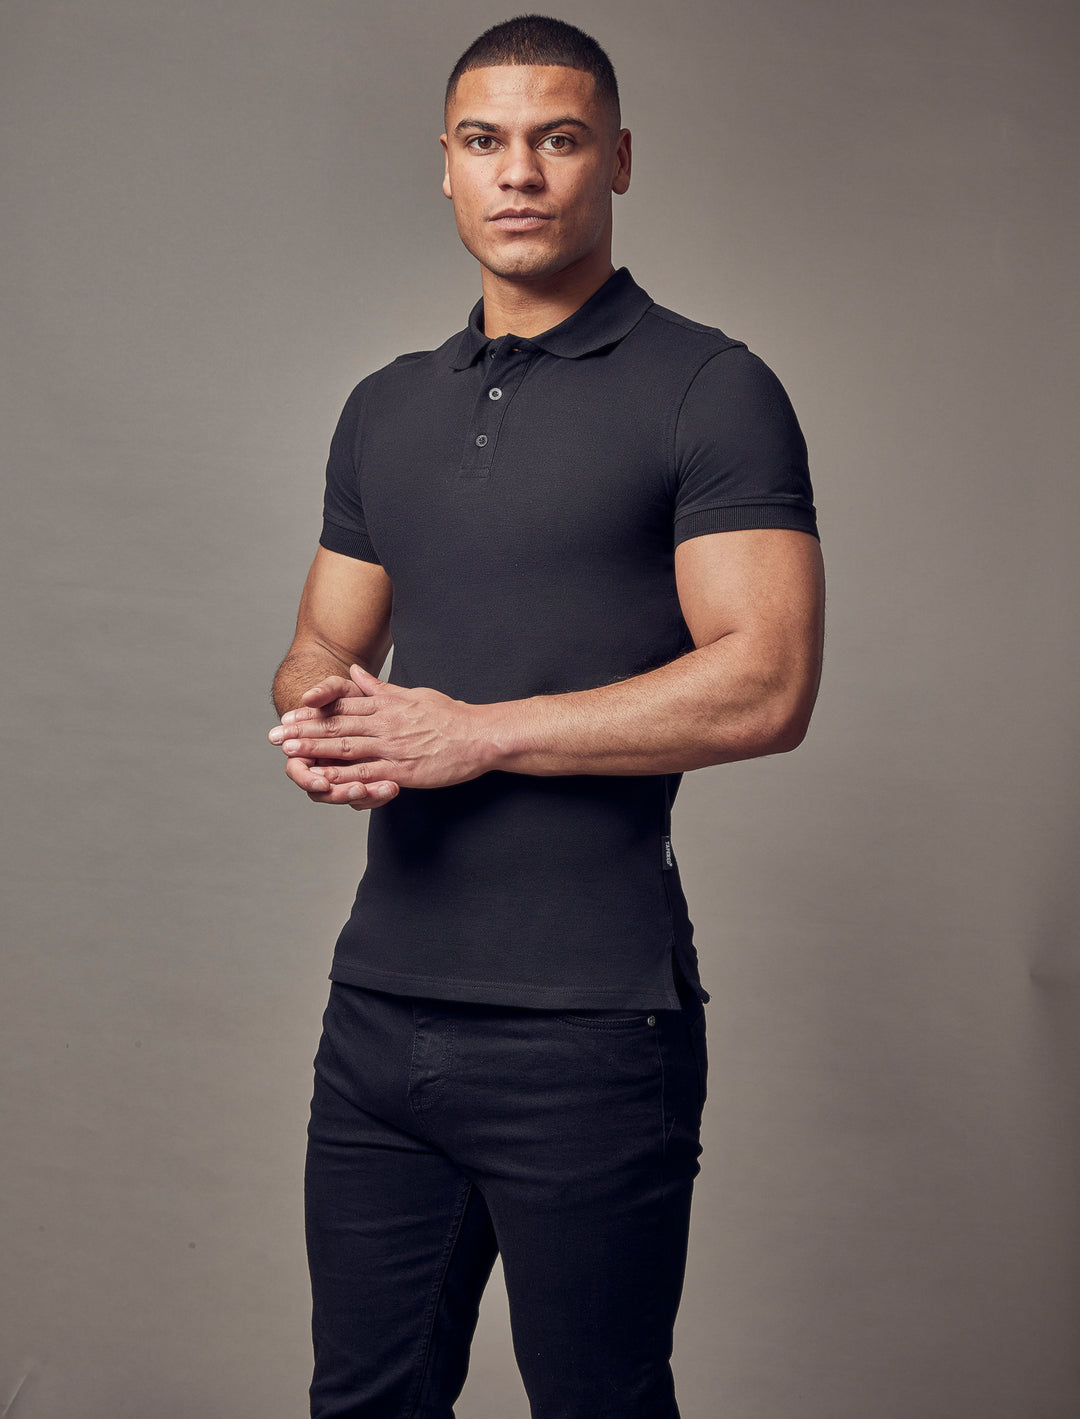 short sleeve black tapered fit polo shirt by Tapered Menswear, showcasing the muscle fit design for a comfortable and modern silhouette